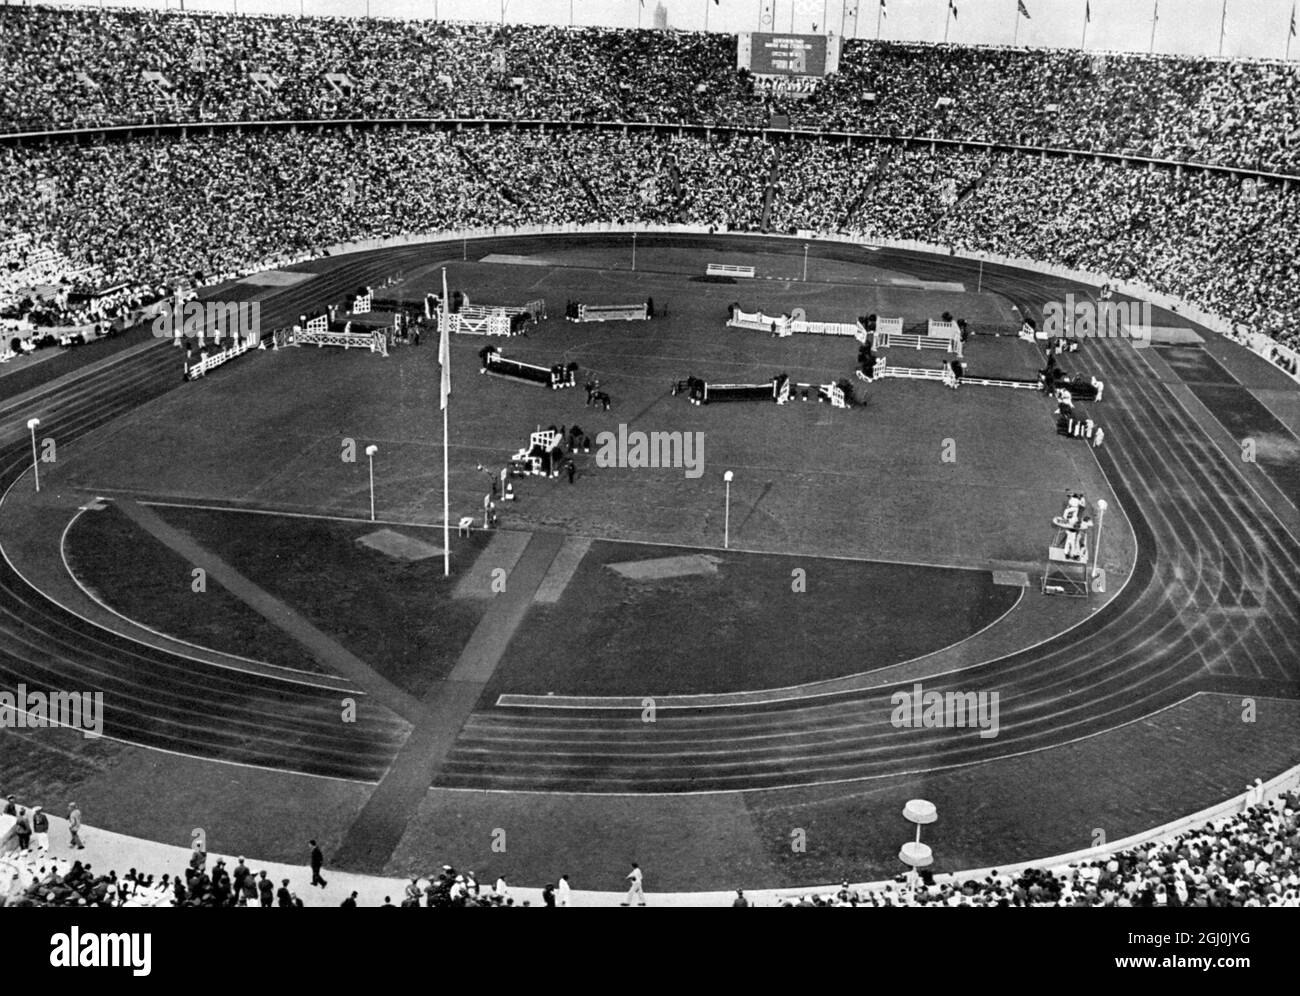 1936 Olympics, Berlin - Riding - The conclusion of the hunt jumping ''price of the nations'' took place on the last day of events in the Olympic Stadium. (Als sportlicher Abschluss fand am letzten Tage der Spiele im Olympiastadion das grosse Jagdspringen, der ''Preis der Nationen'' statt.) ©TopFoto Stock Photo